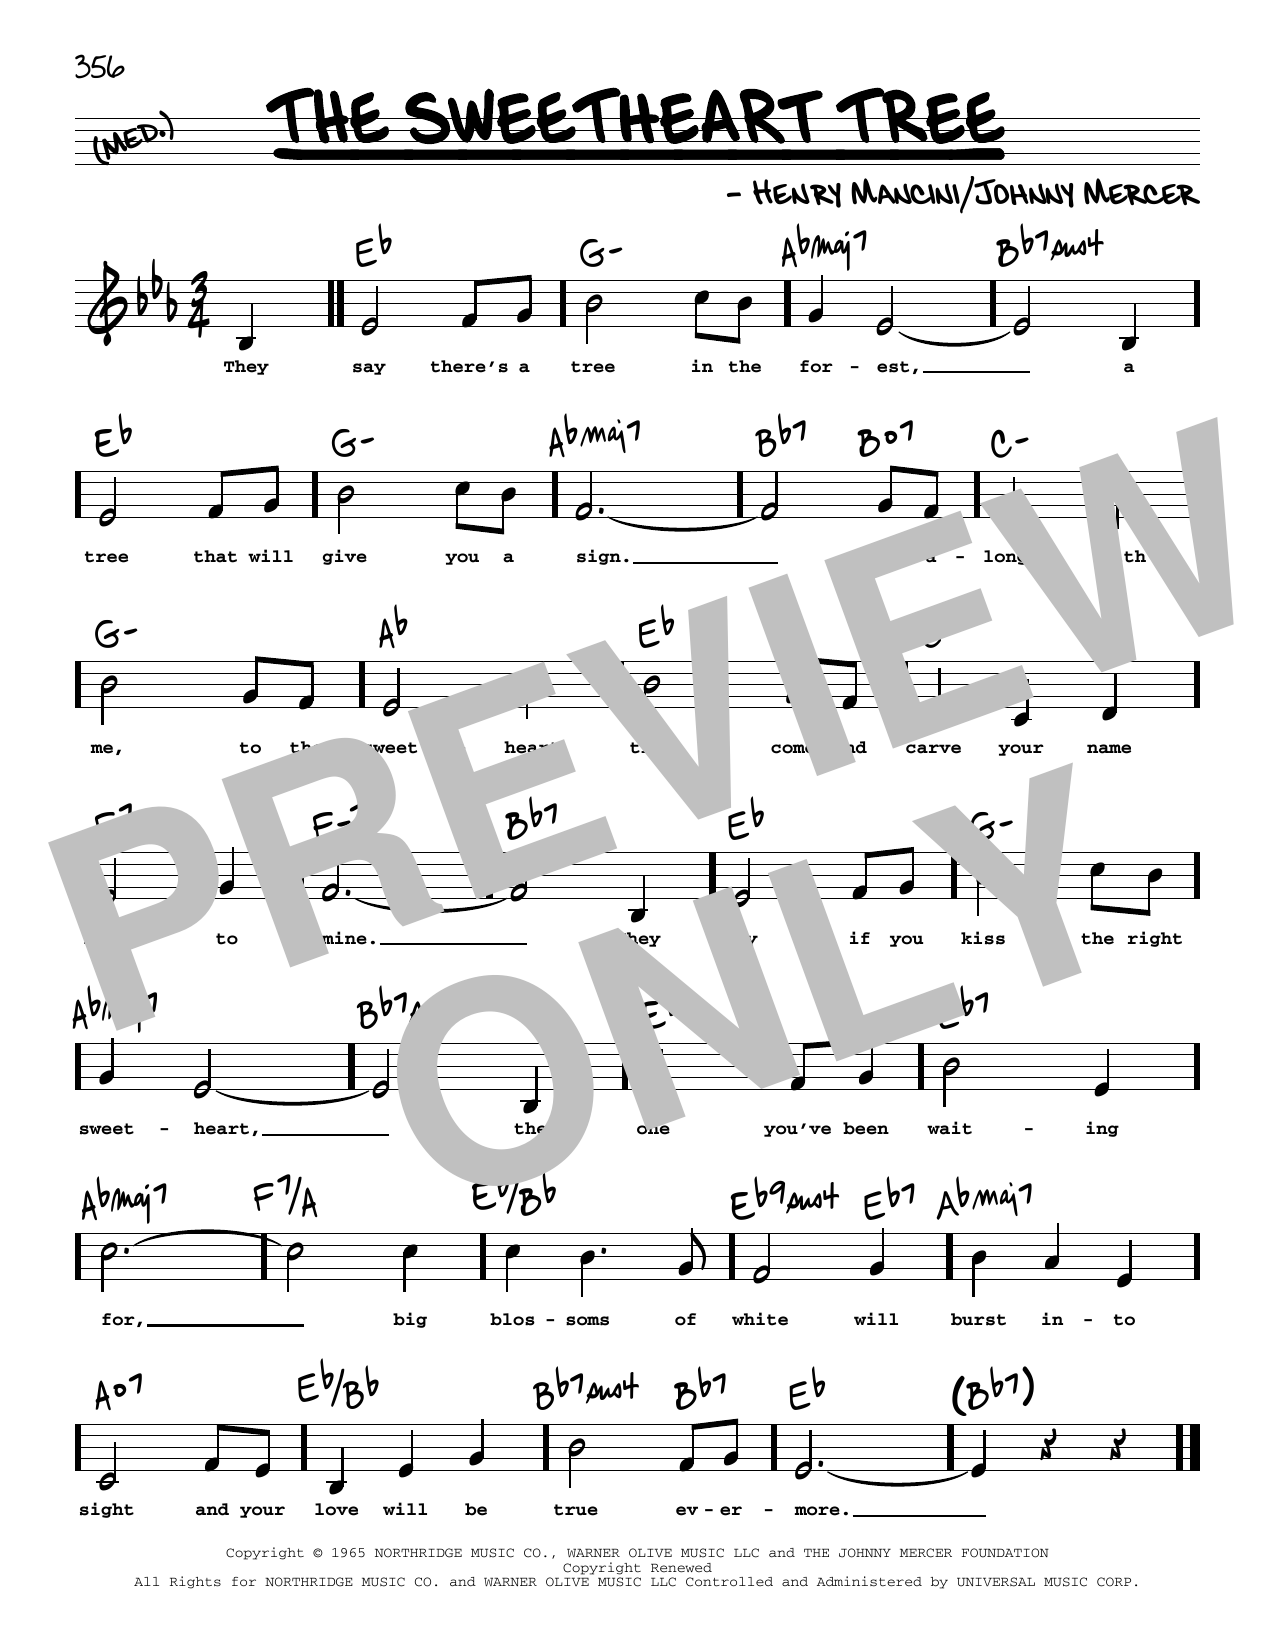 Henry Mancini The Sweetheart Tree (Low Voice) sheet music notes printable PDF score